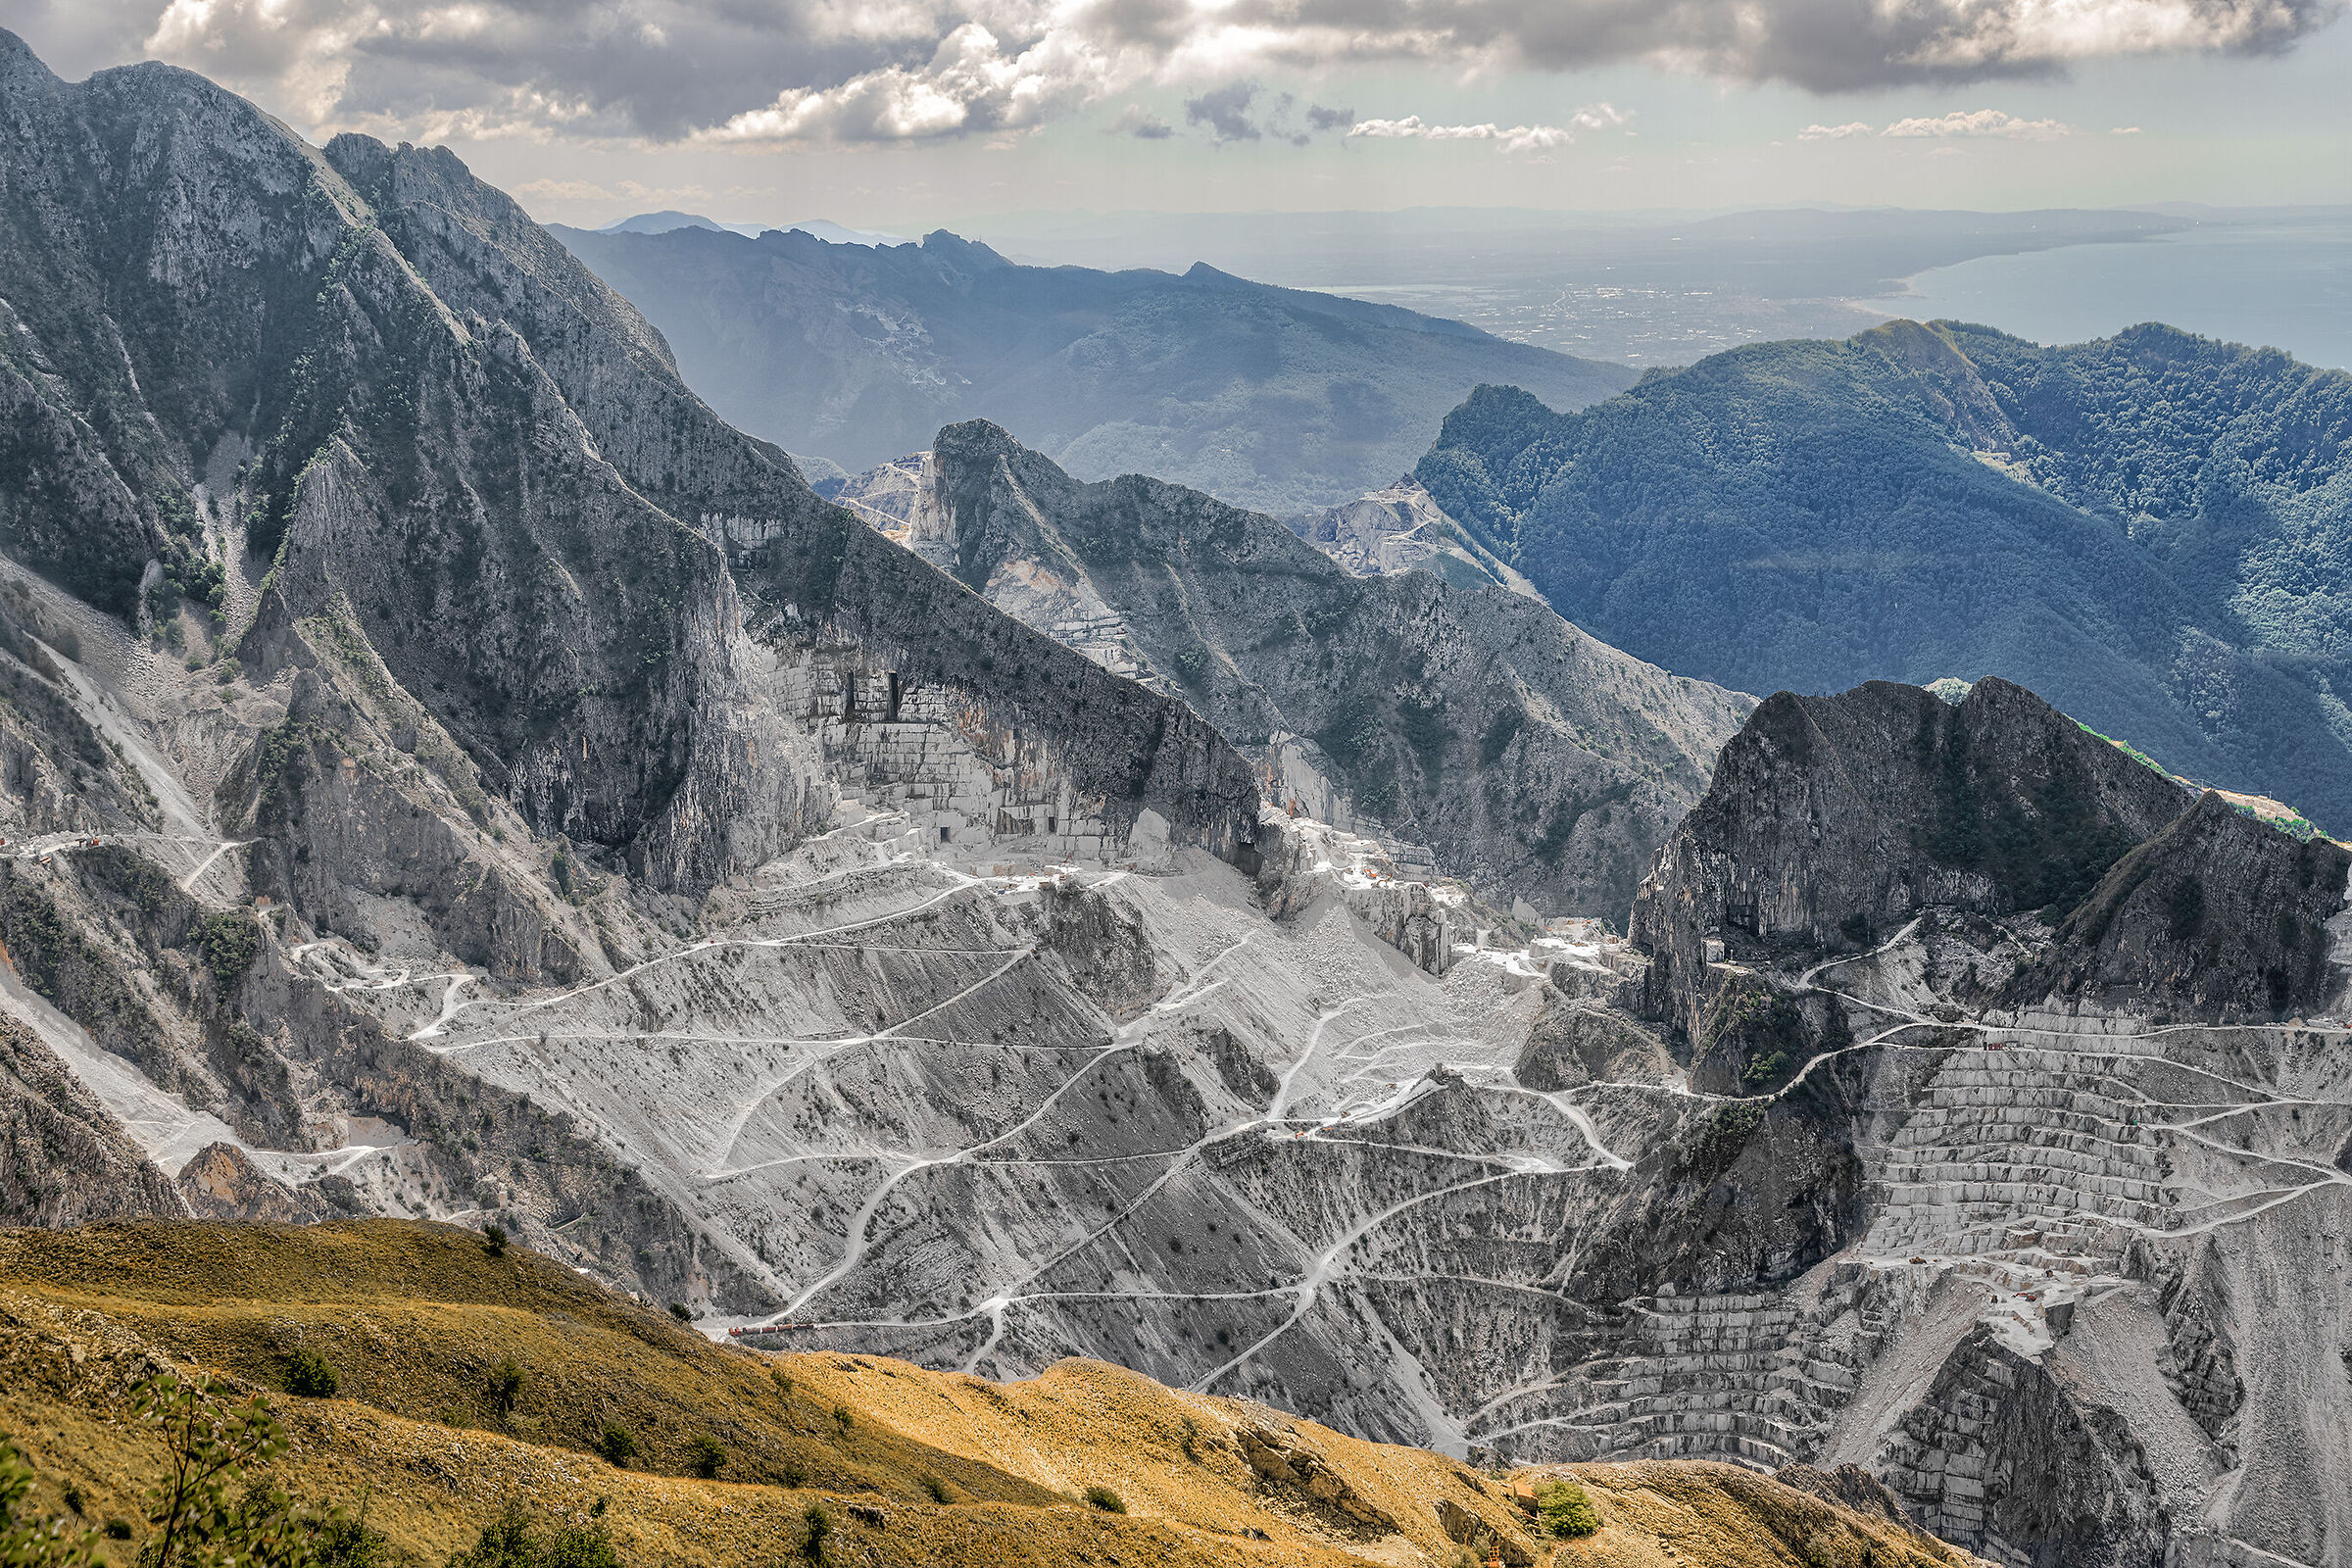 The Carrara marble quarries from Campo Cecina...